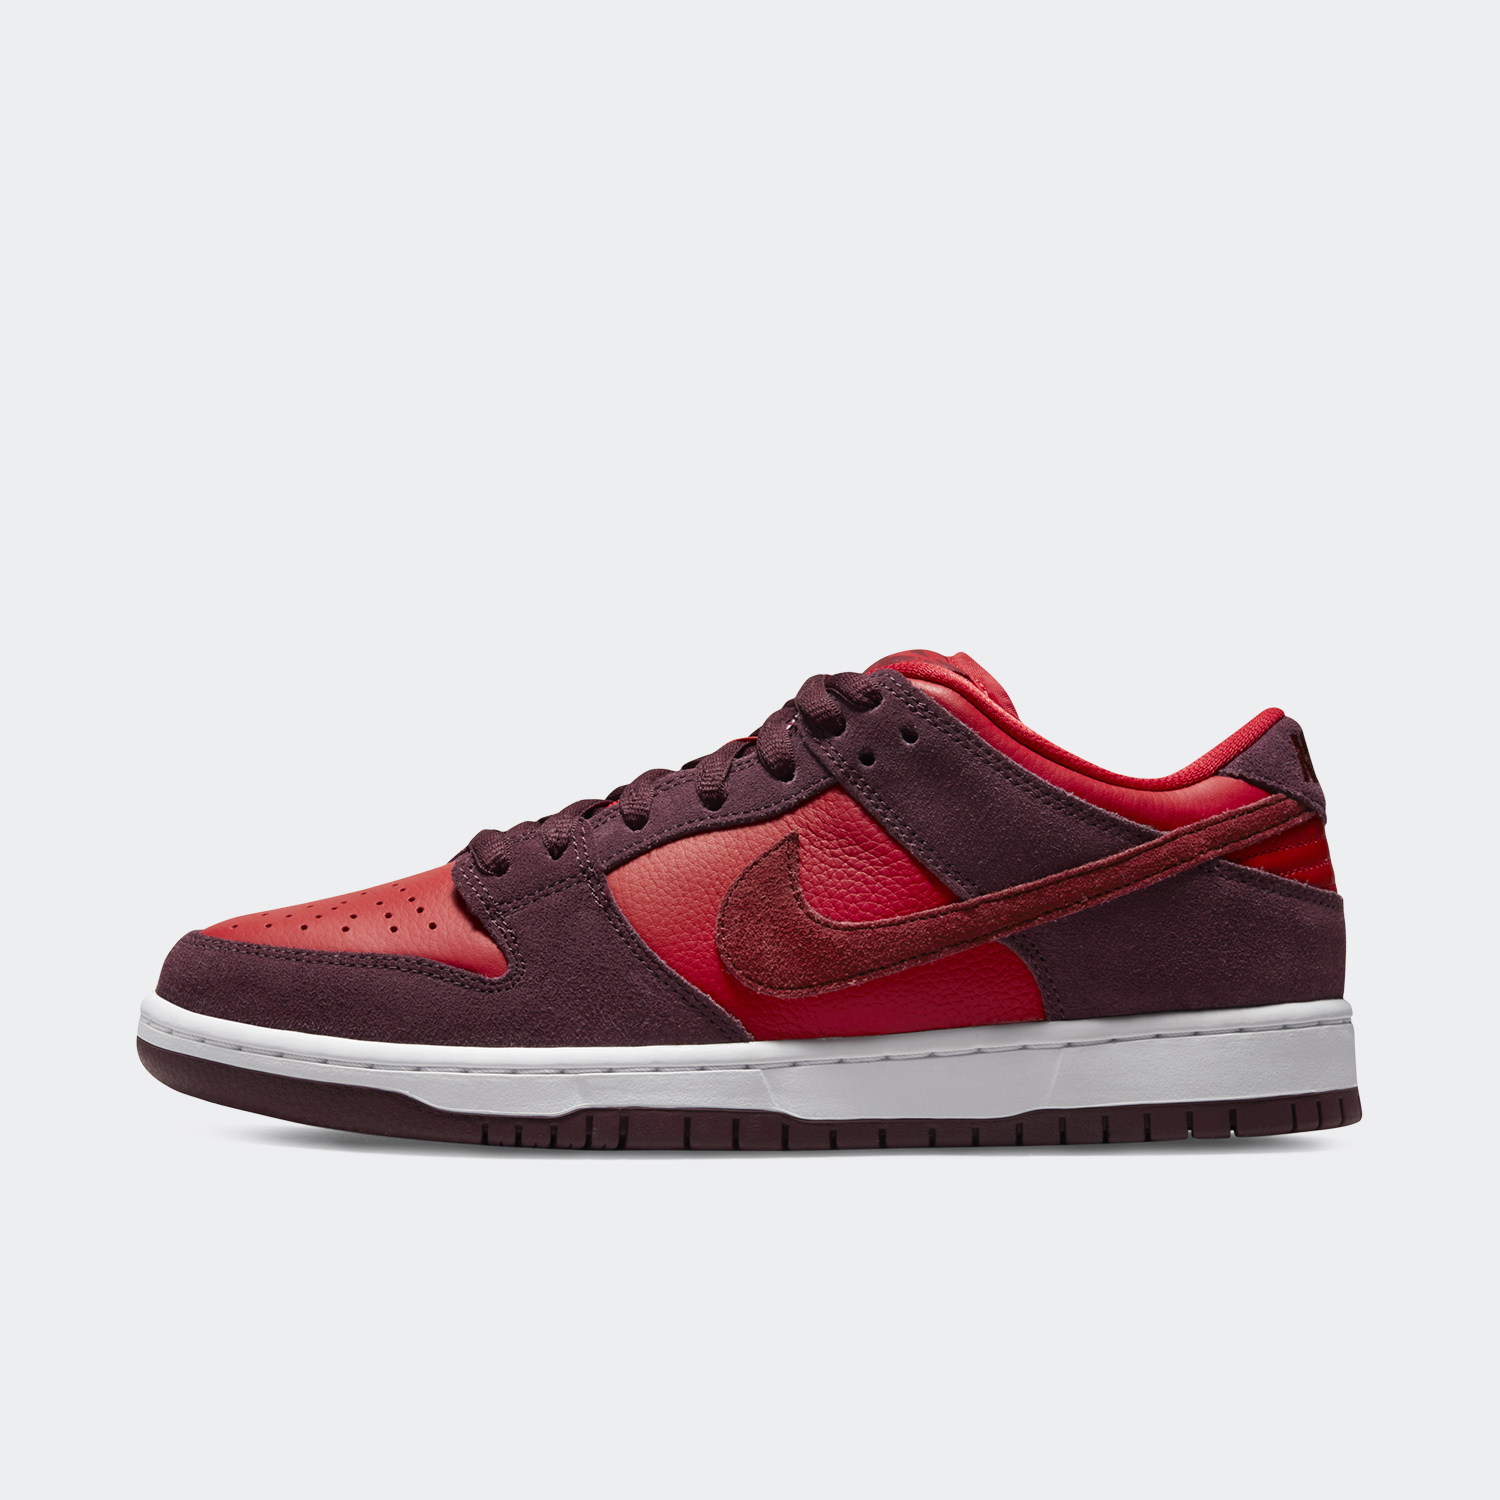 Nike SB Dunk Low – Cherry | sneakerb0b RELEASES